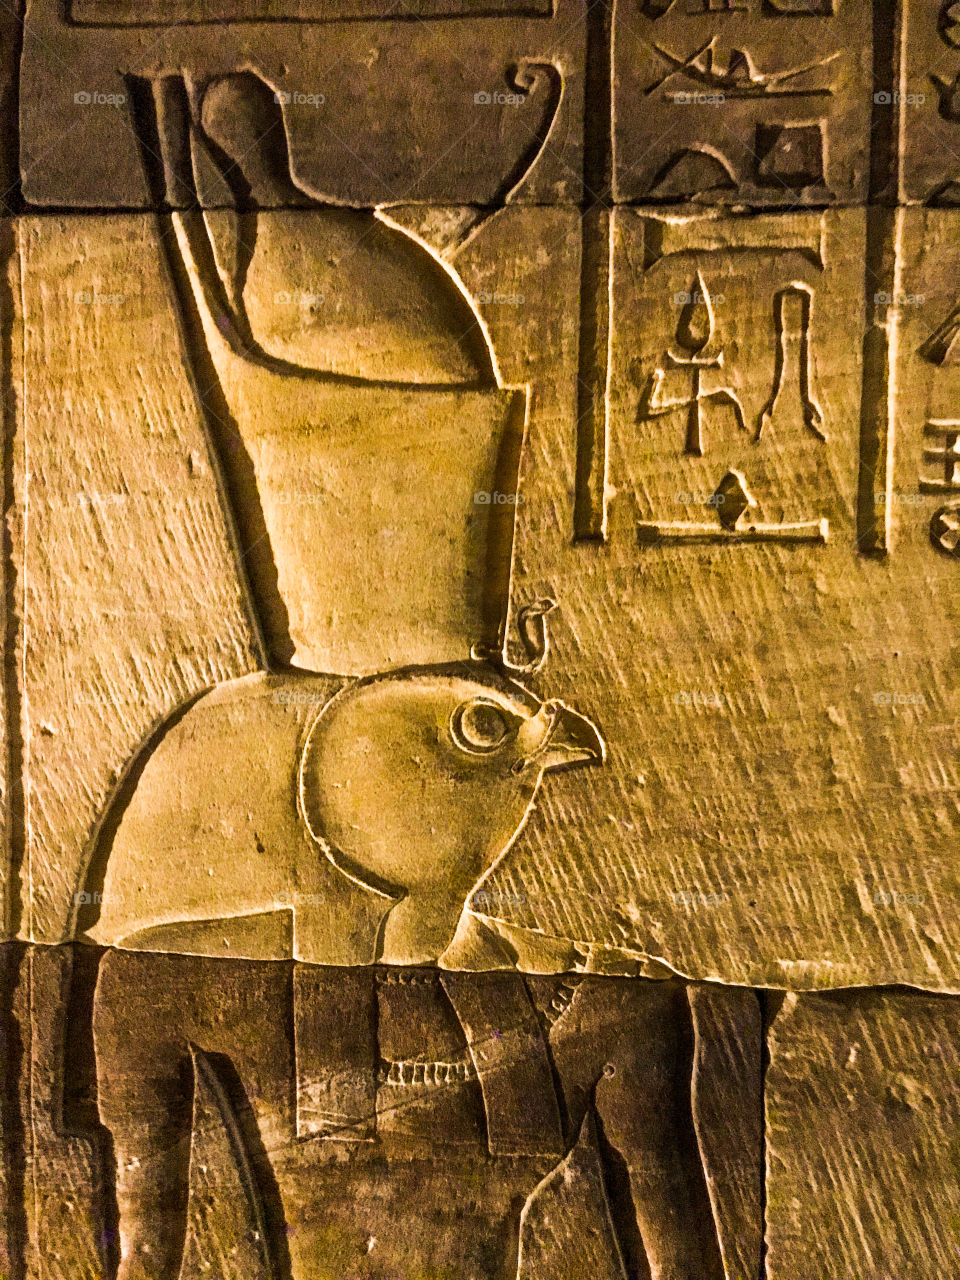 The ancient Egyptian God "Horus" carved into the ancient Egyptian temple of Horus in Aswan, Egypt. Isn't it incredible?!